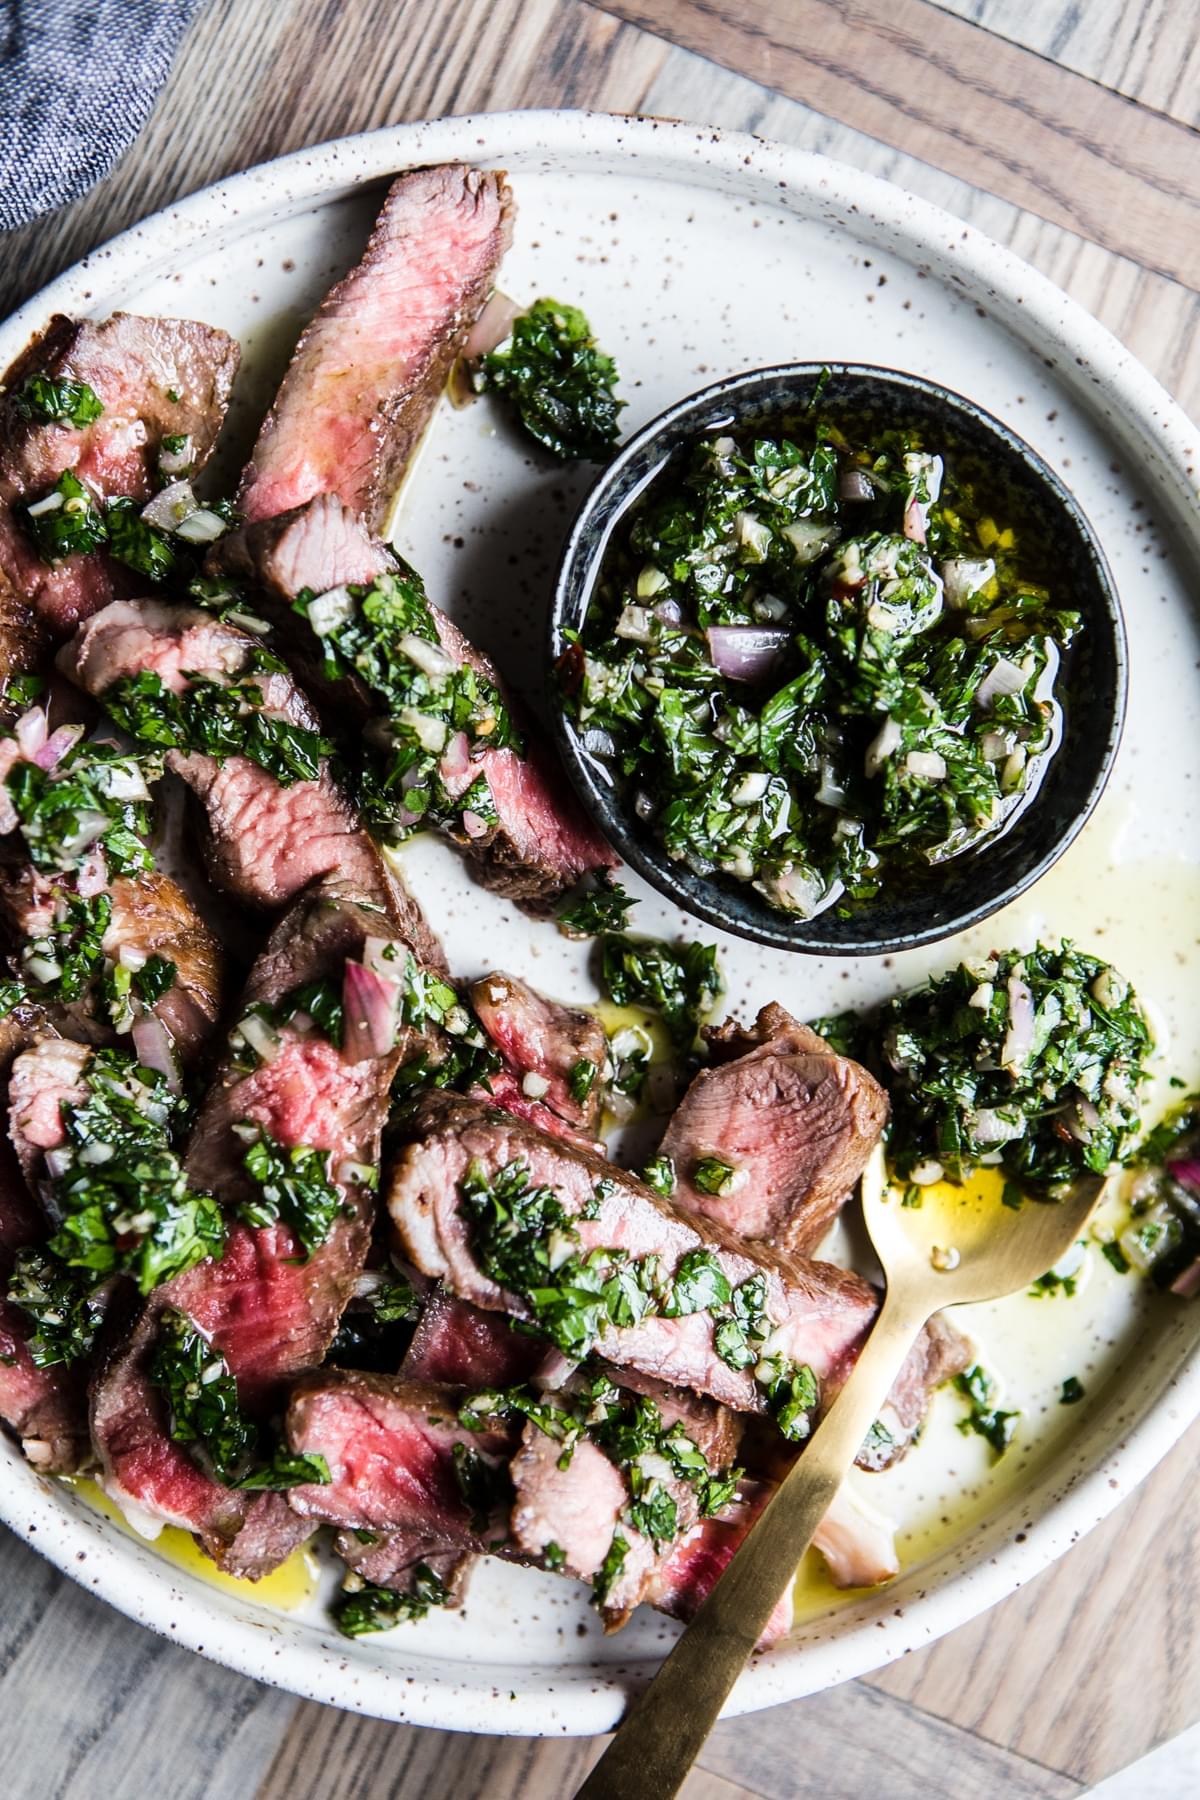 low carb dinner of sliced up steak served with homemade whole30 chimichurri